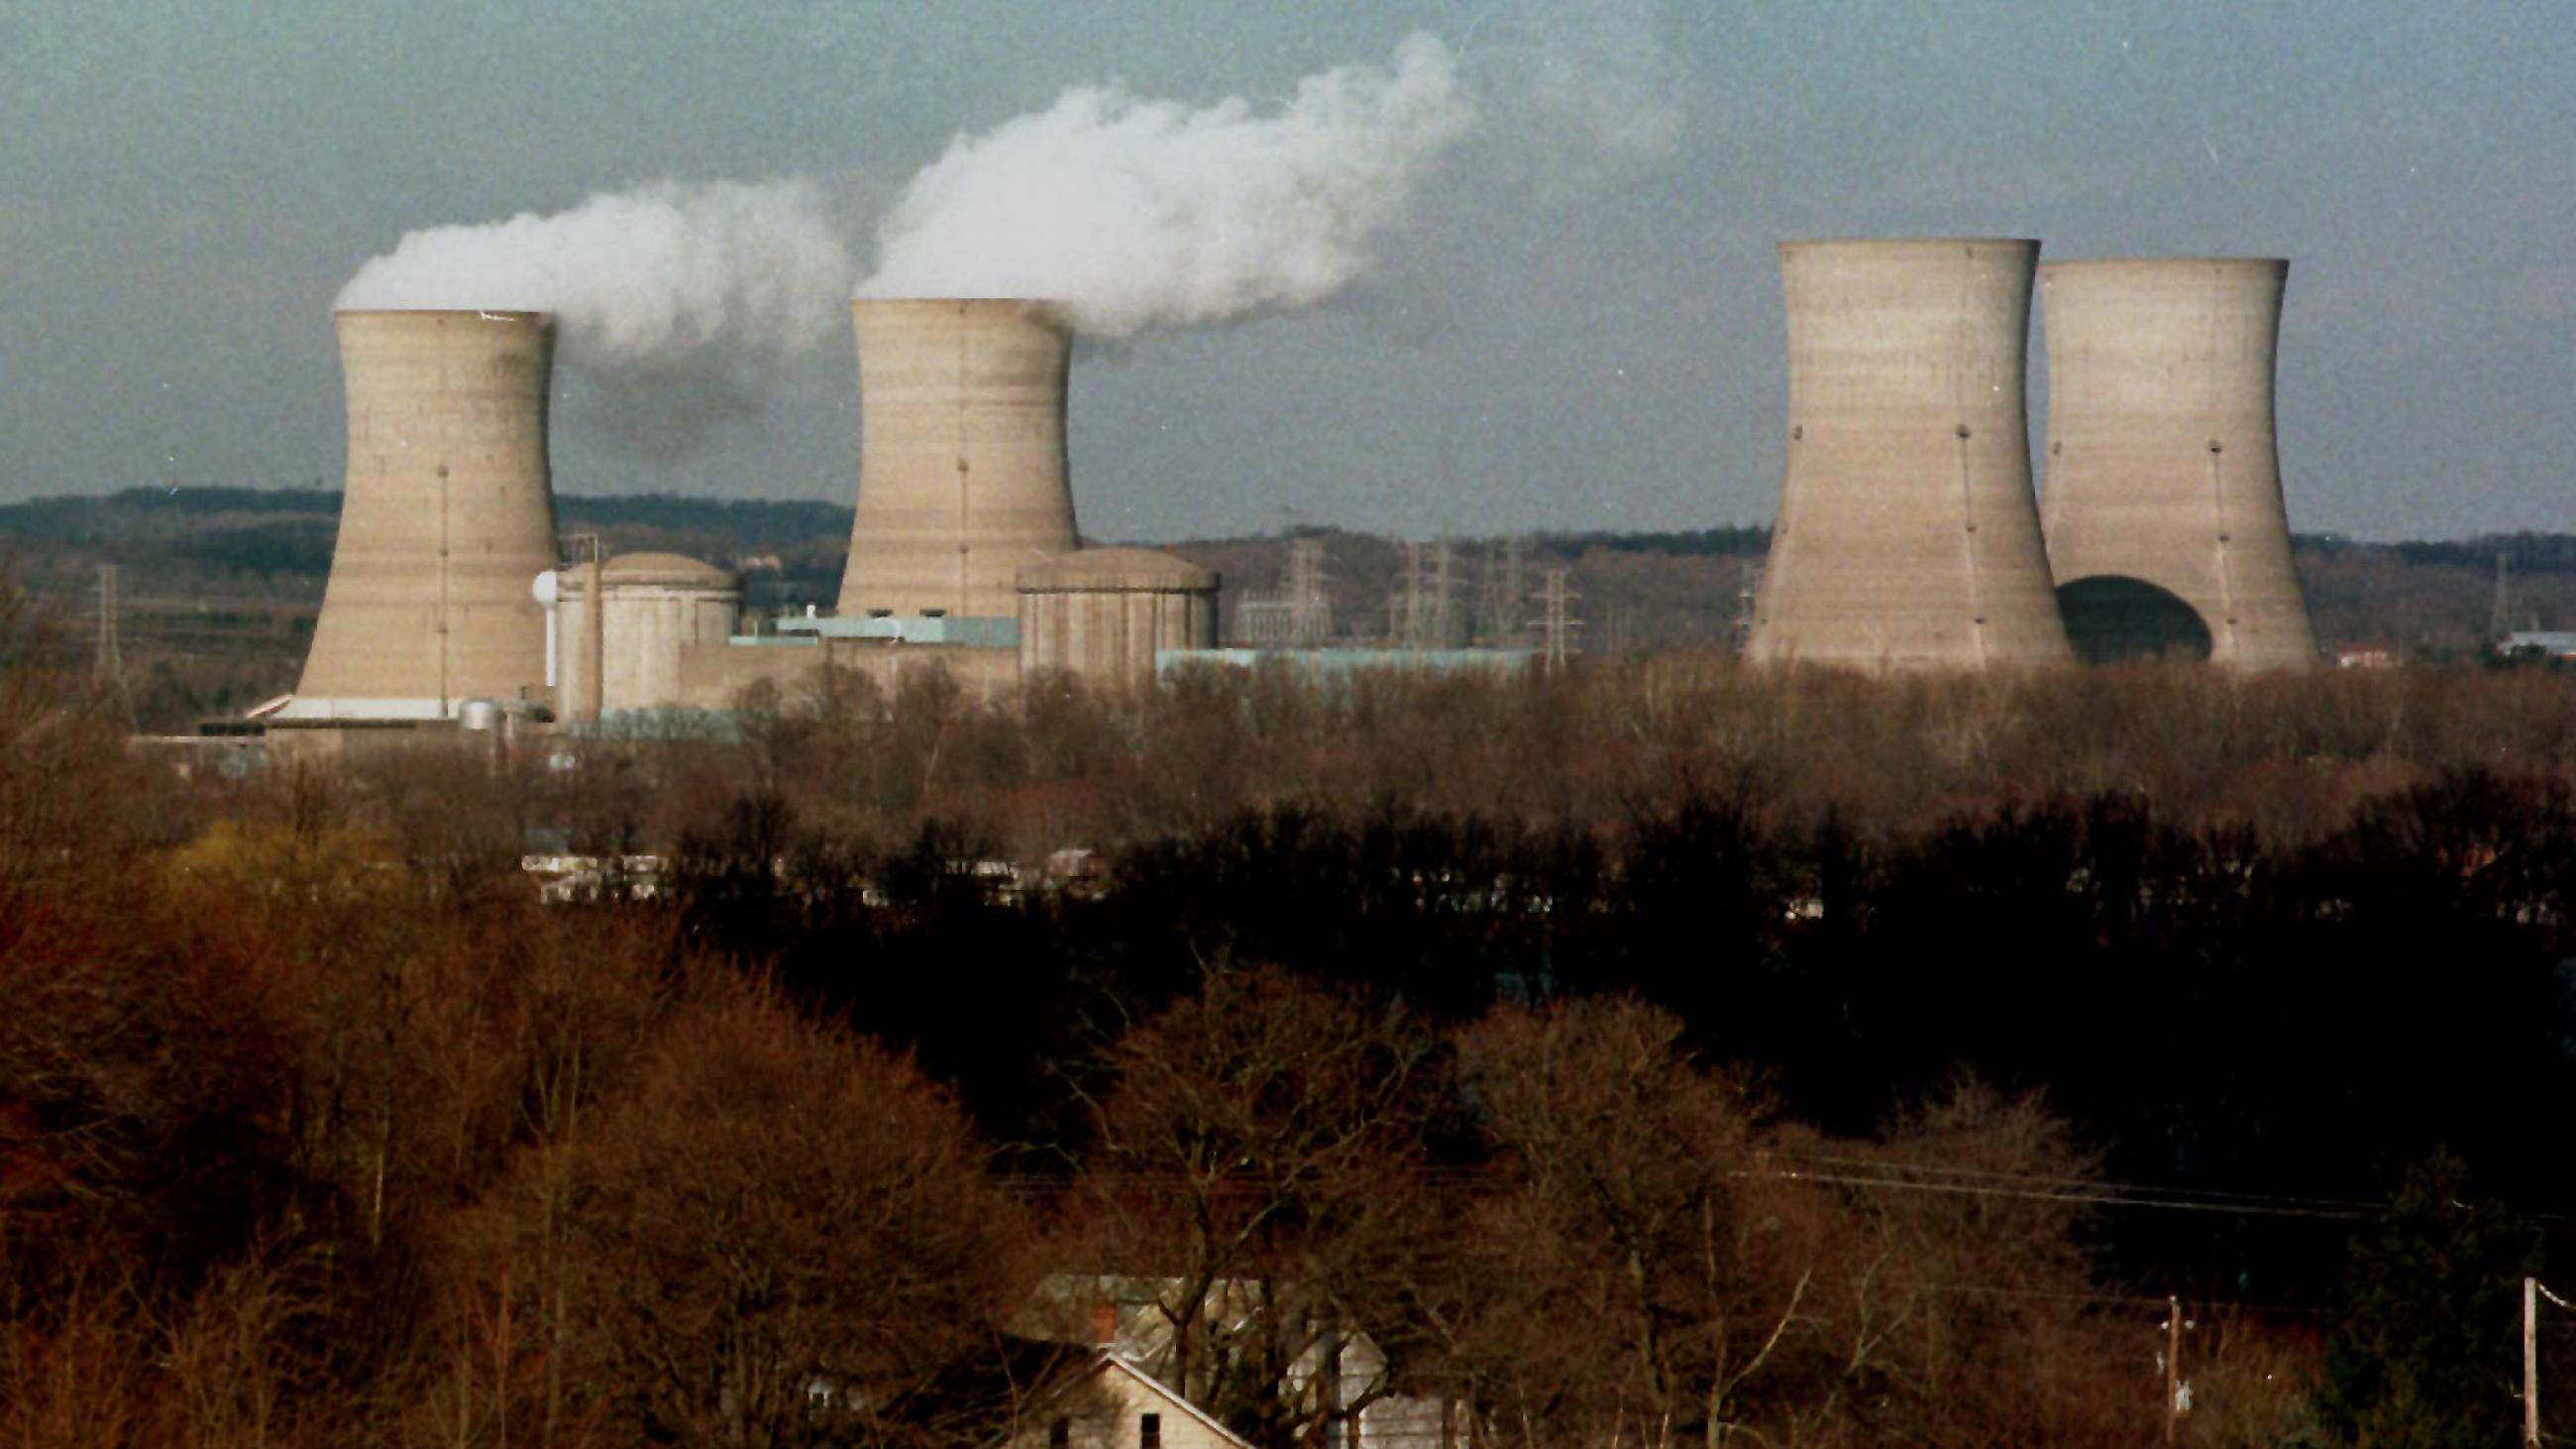 Four nuclear reactors, two dormant and two with columns of white smoke, stand against a blue sky. In the foreground are the bare branches of a forest in winter surrounding some small light-colored houses